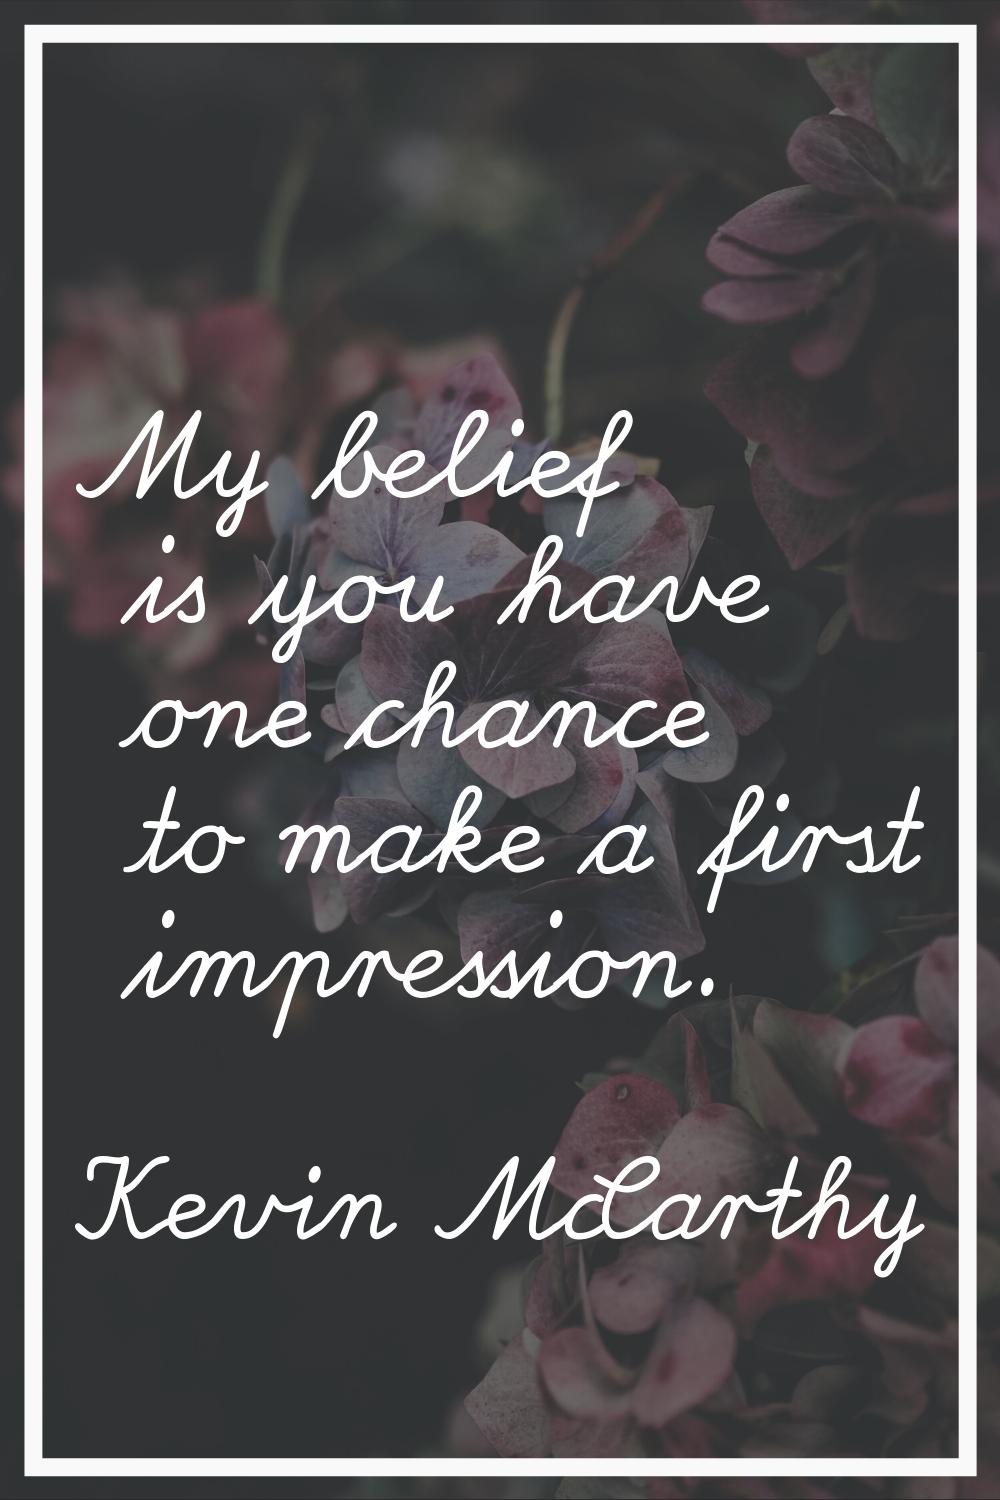 My belief is you have one chance to make a first impression.